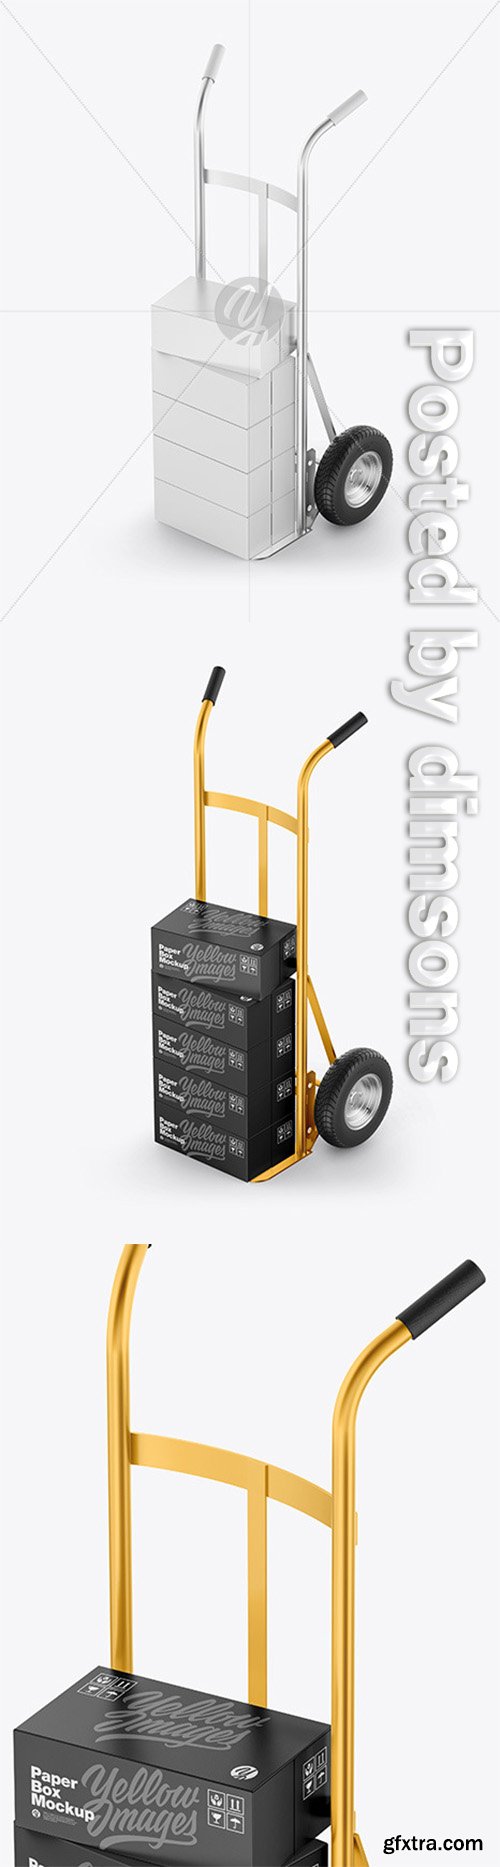 Metallic Hand Truck With Boxes Mockup 65029